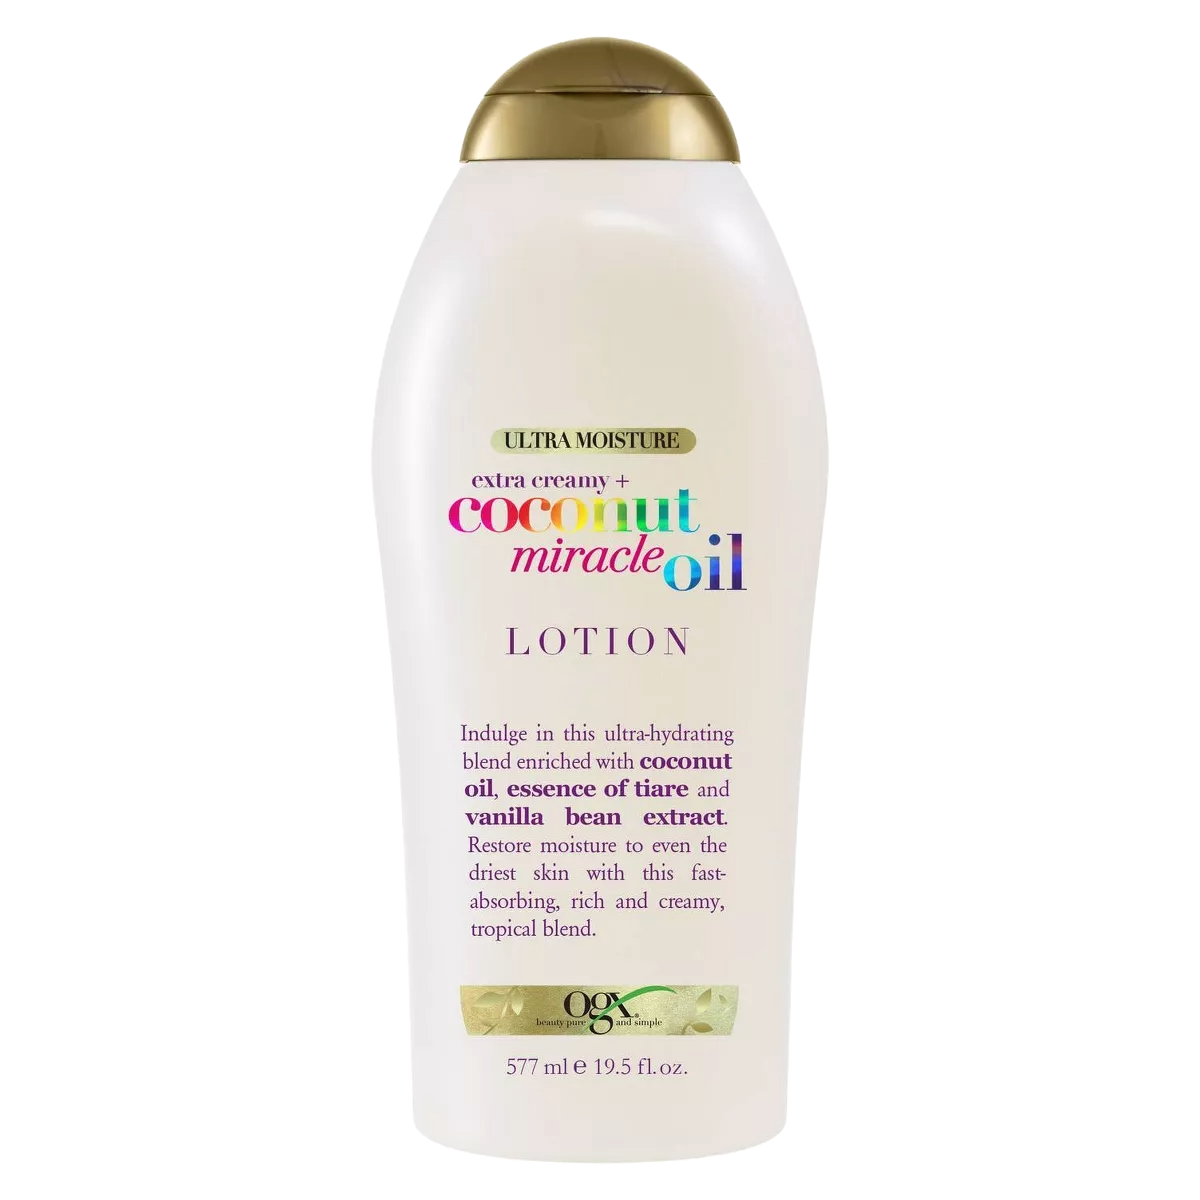 ogx extra creamy and coconut miracle oil lotion dupe